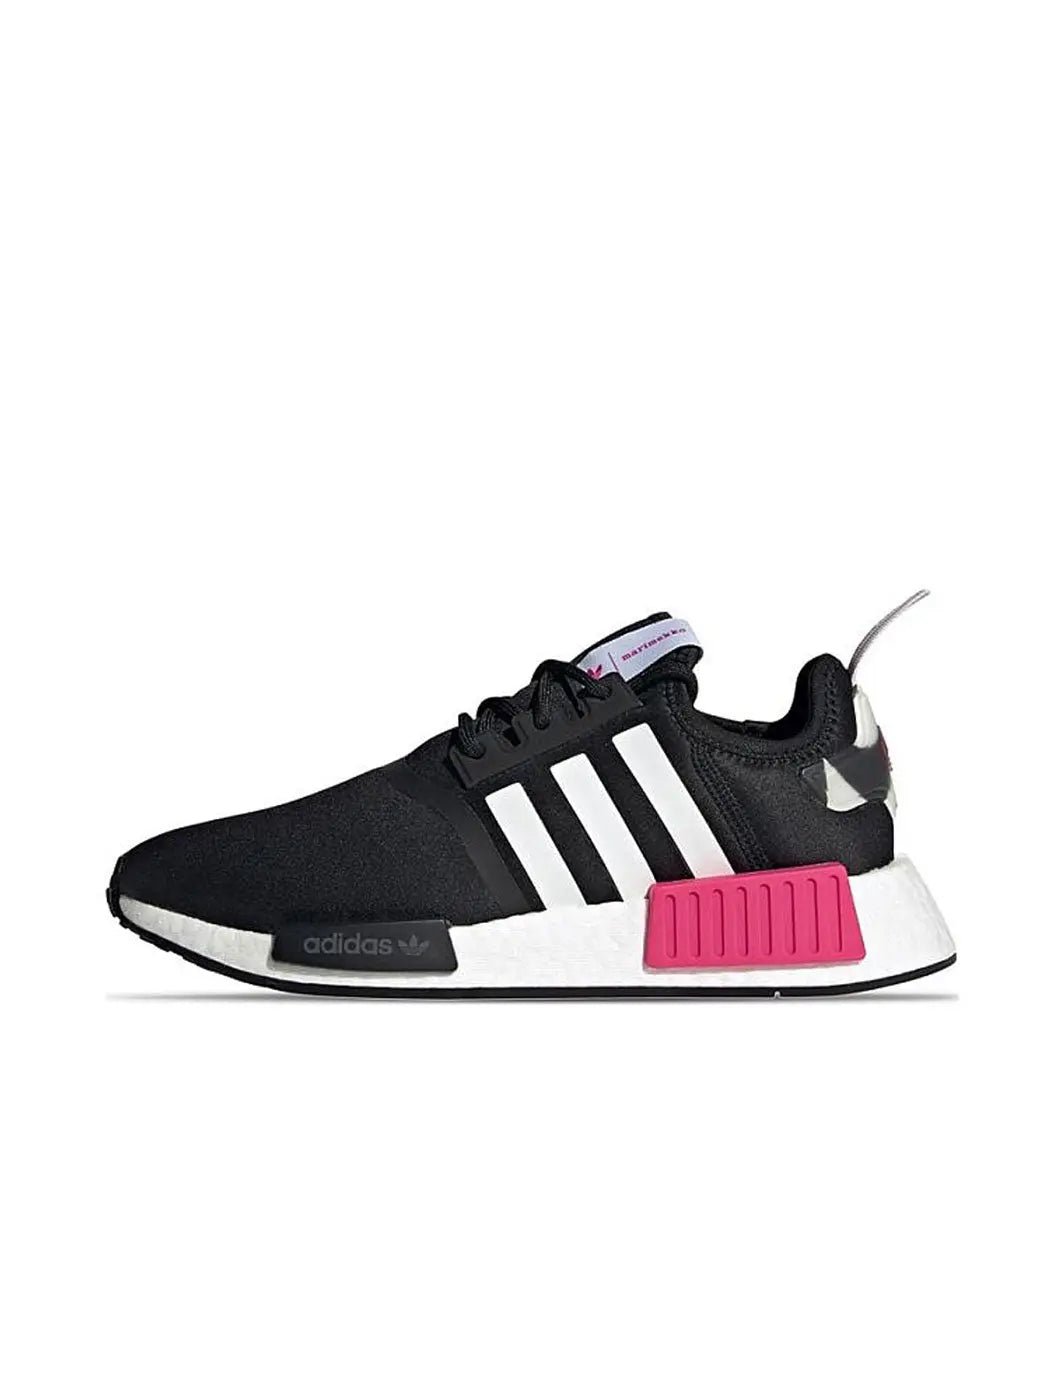 nmd shoes sale